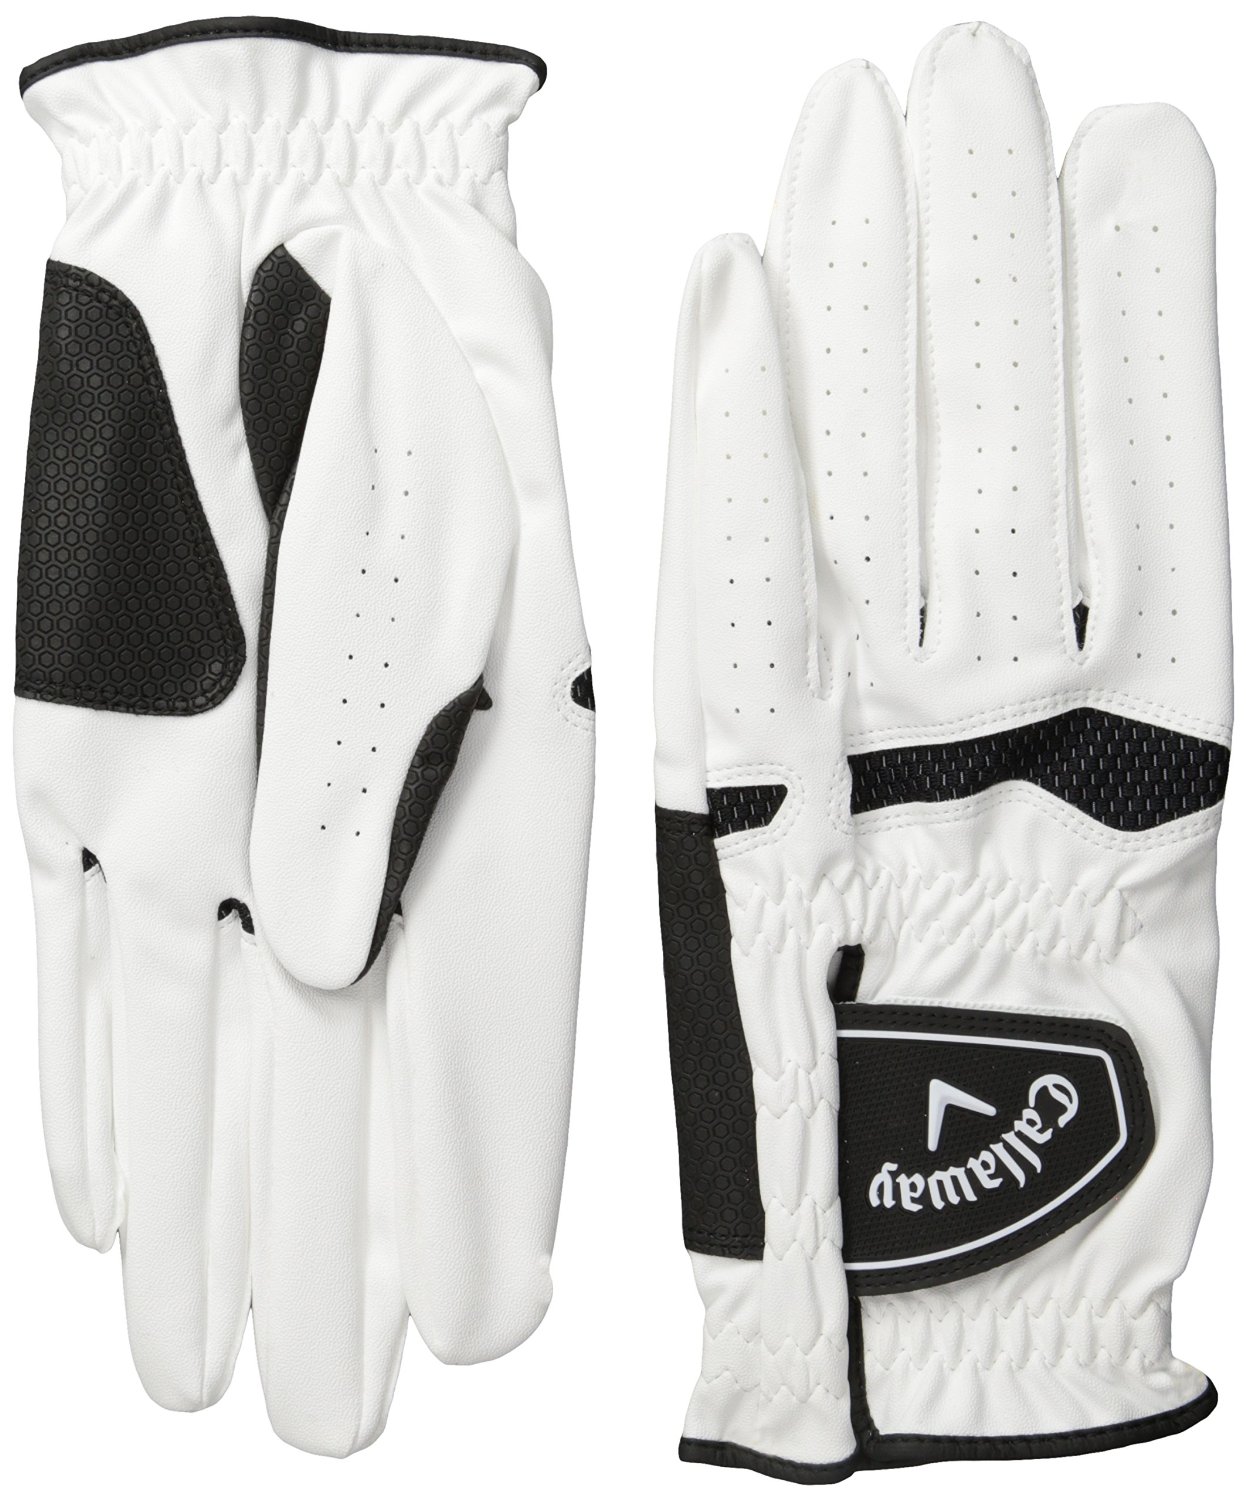 Mens Callaway Xtreme 365 Golf Gloves Pack of 2